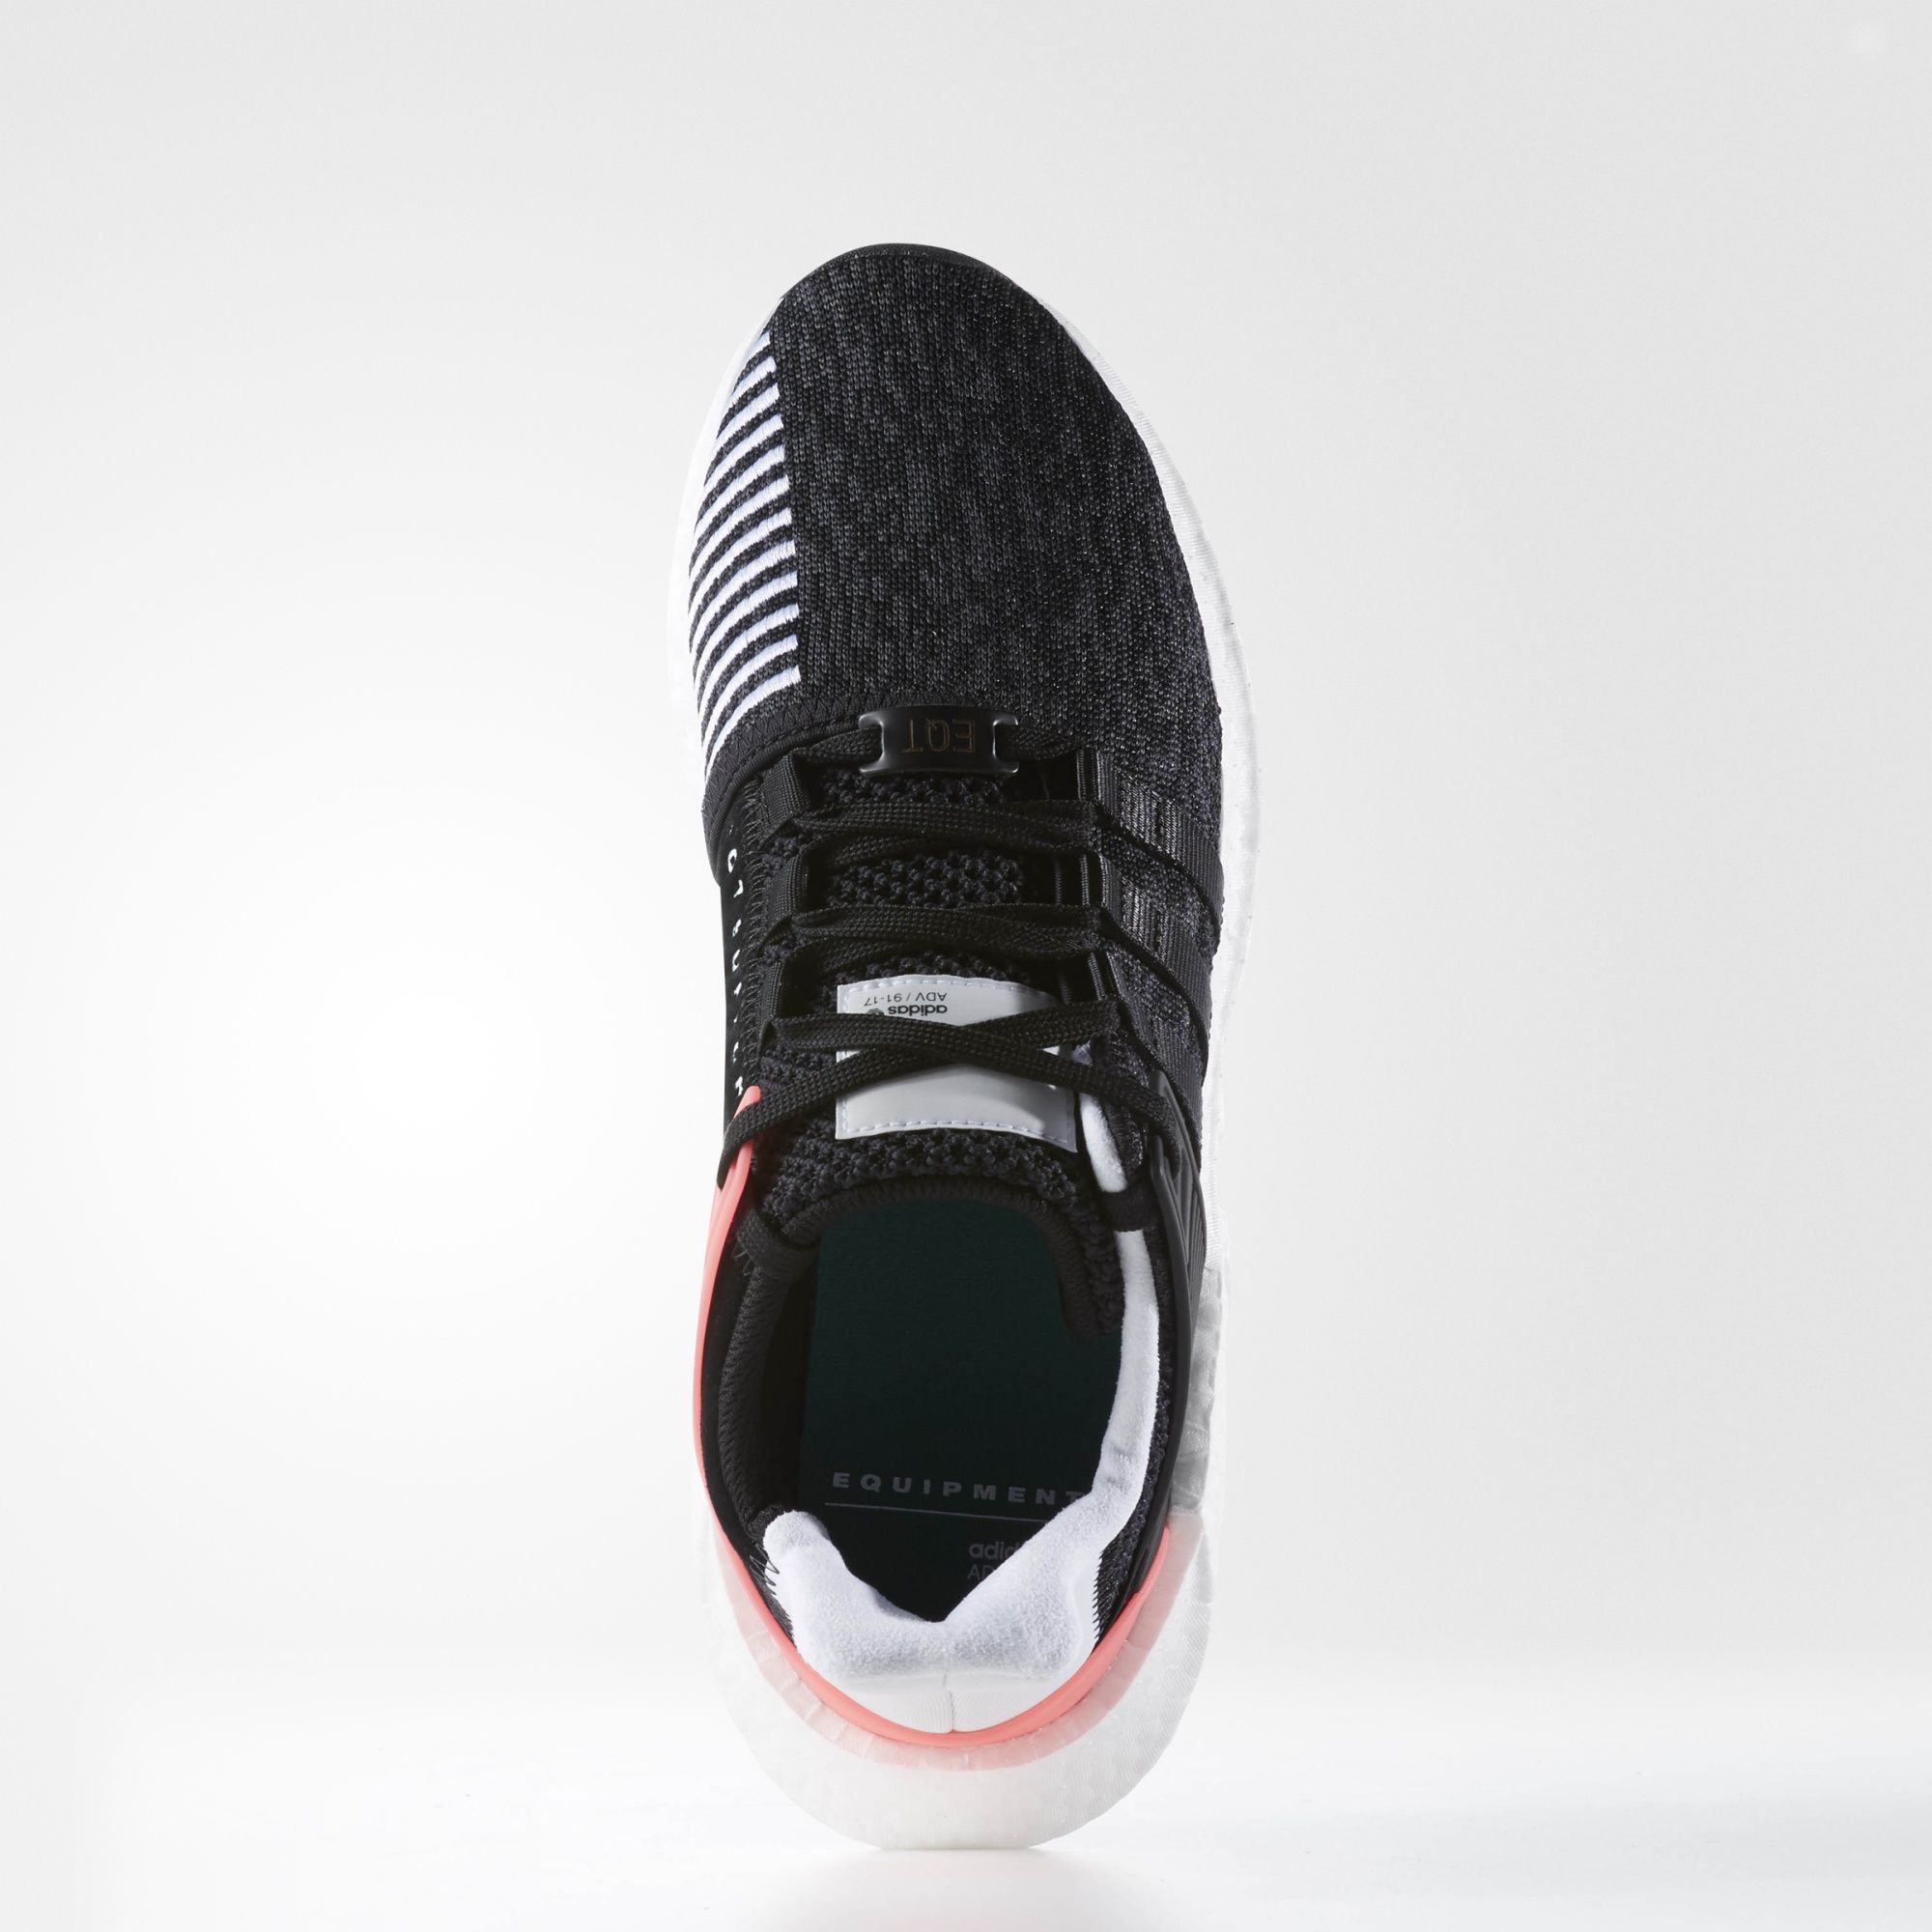 adidas-eqt-support-9317-turbo-red-4